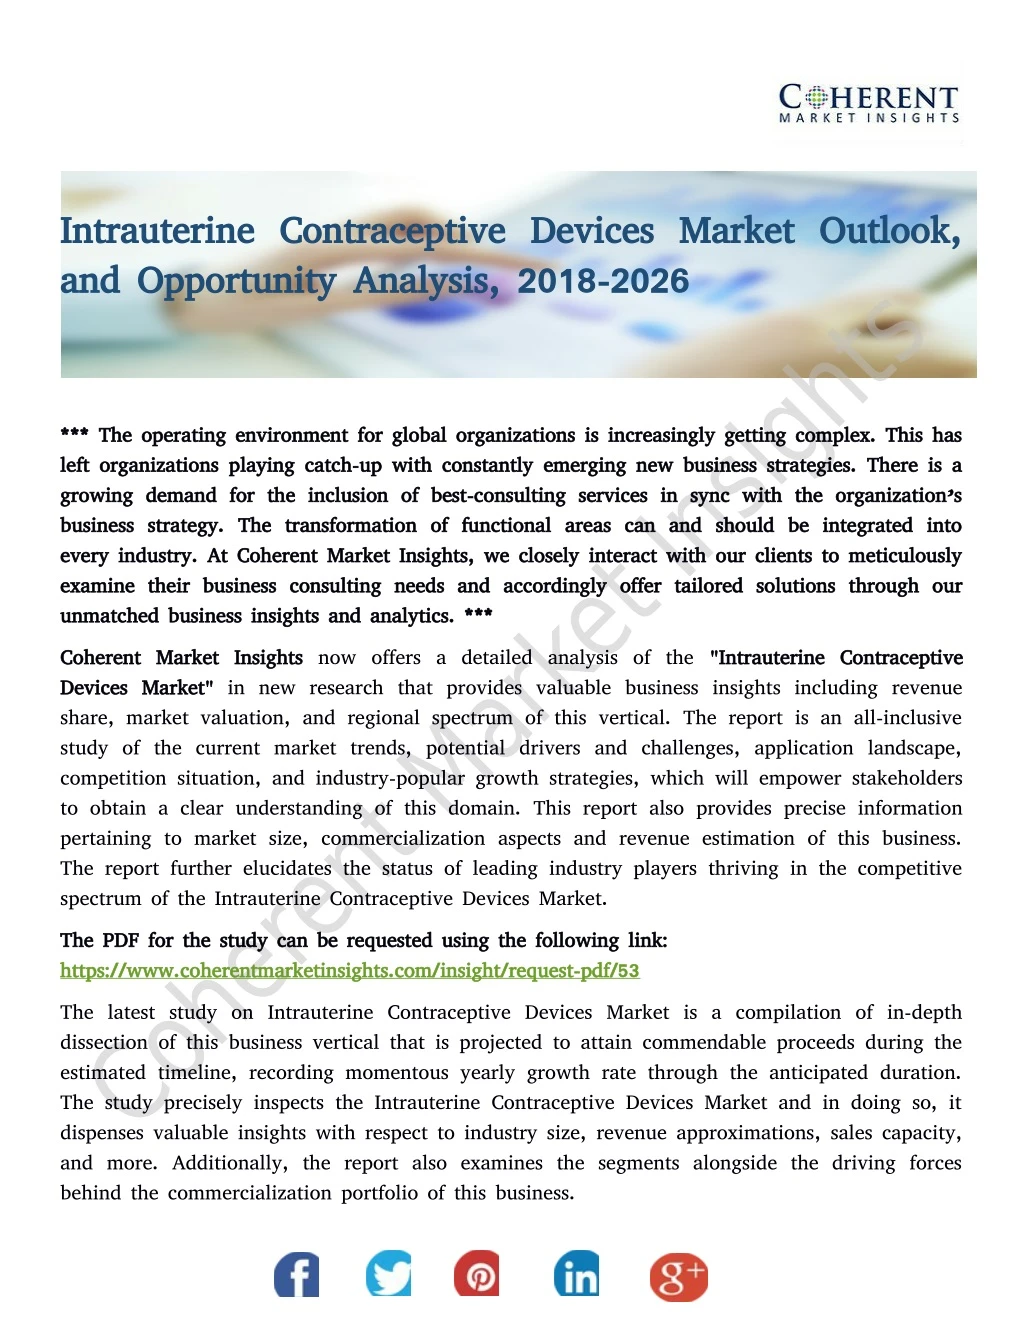 intrauterine contraceptive devices market outlook